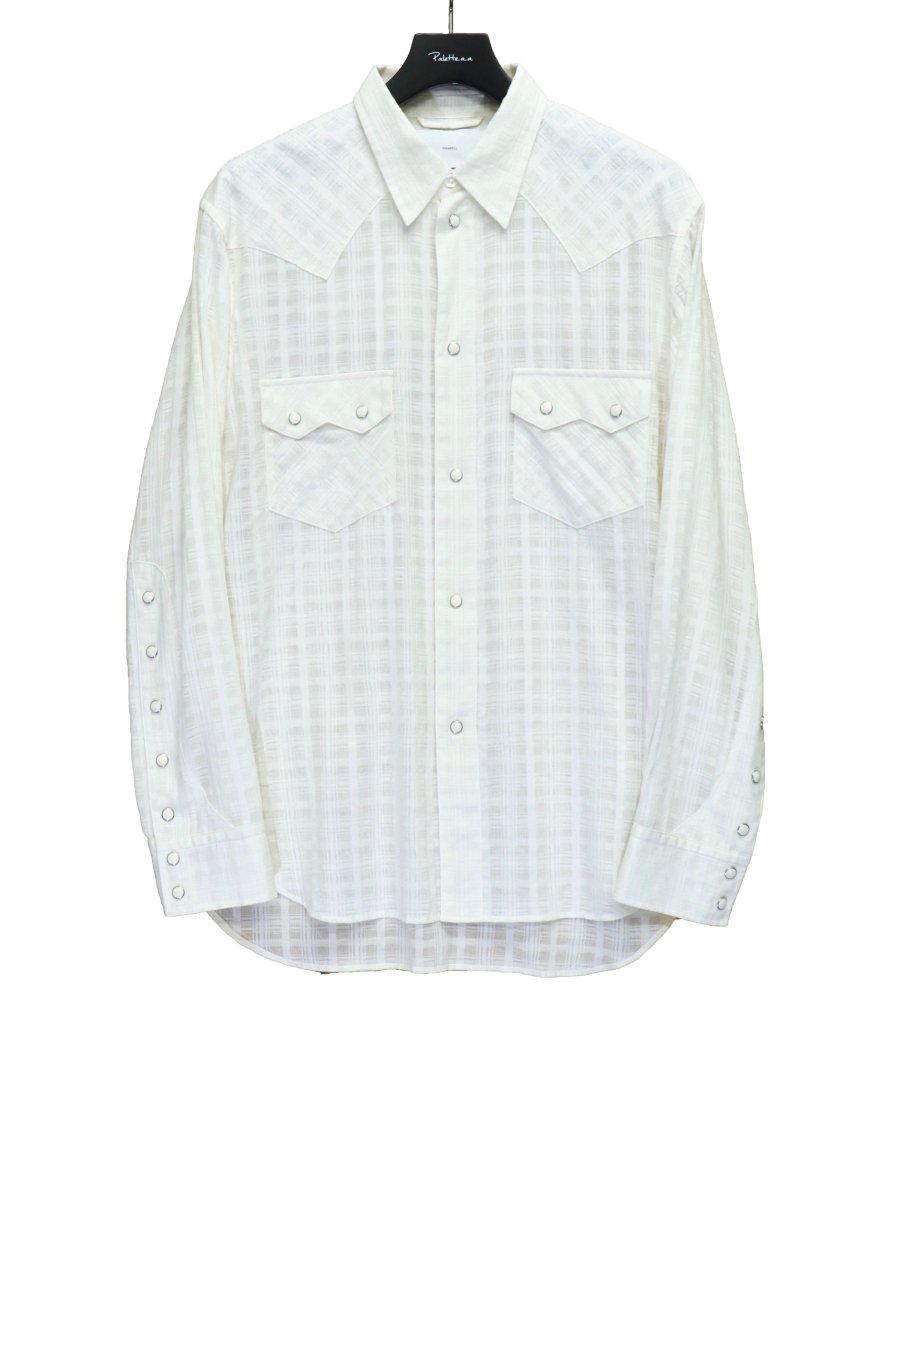 SUGARHILL × P.A.A  KARAMI WESTERN SHIRTS(WHITE)<img class='new_mark_img2' src='https://img.shop-pro.jp/img/new/icons15.gif' style='border:none;display:inline;margin:0px;padding:0px;width:auto;' />